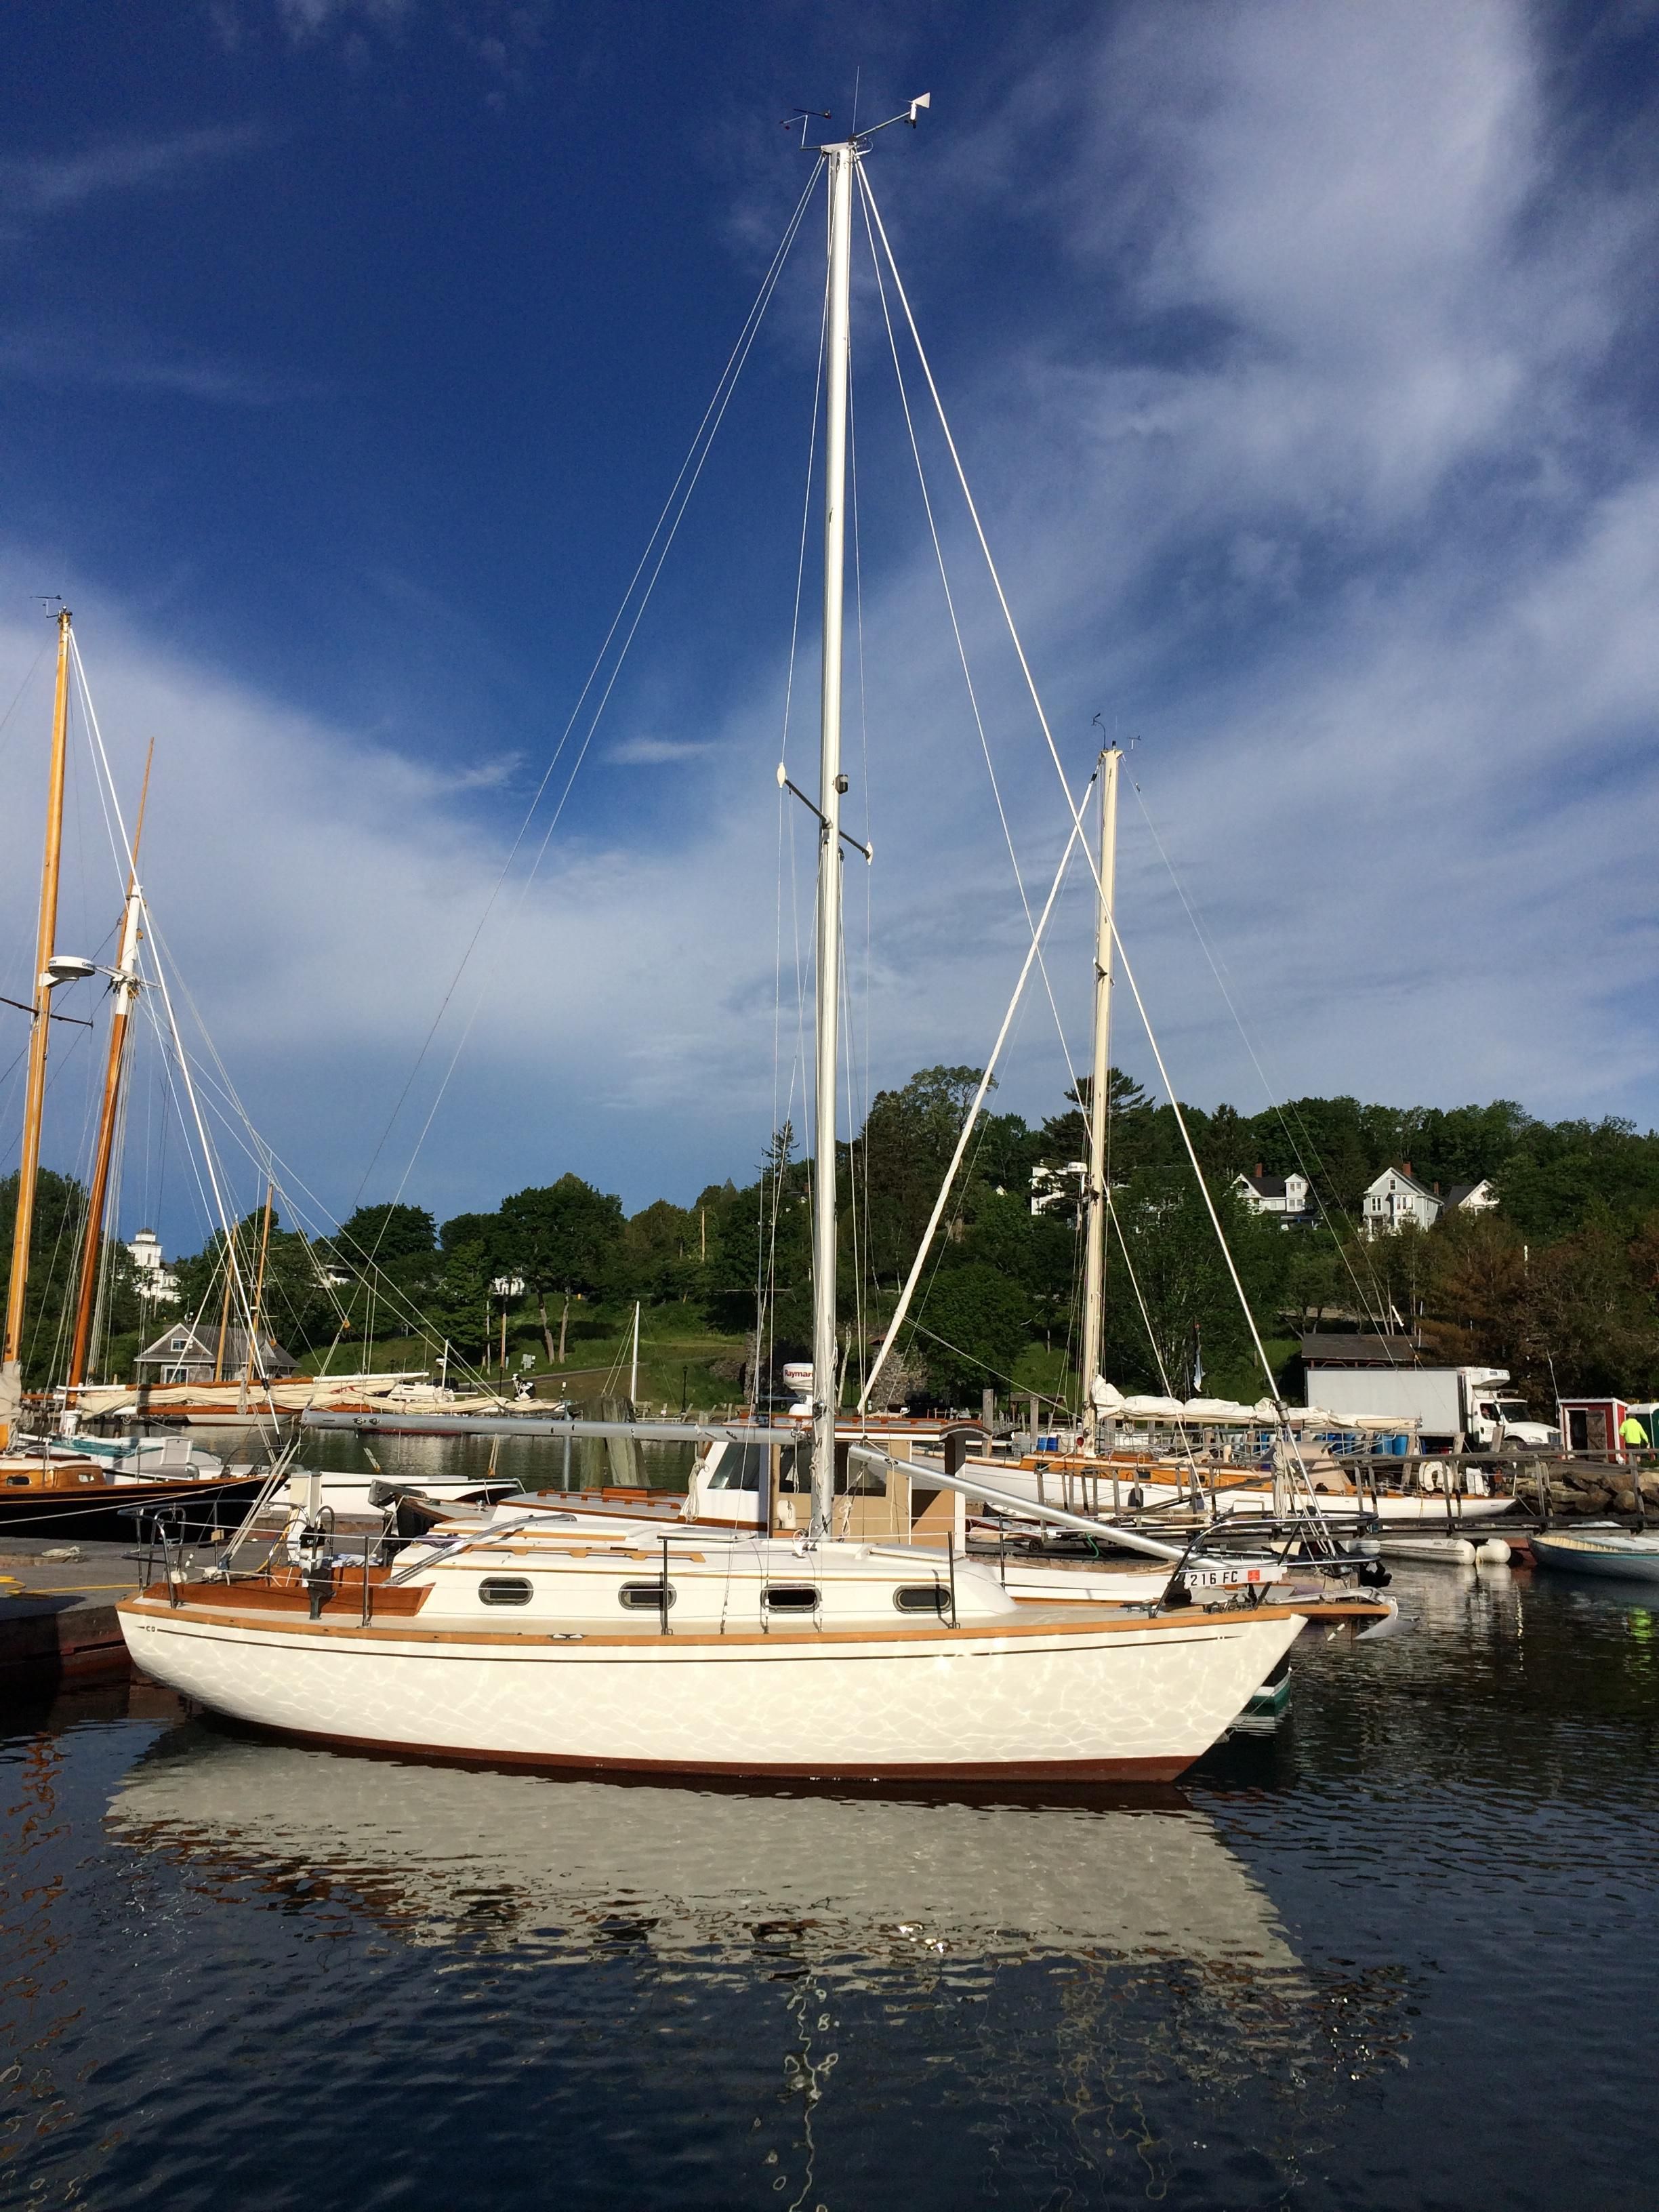 cape dory sailboats for sale by owner